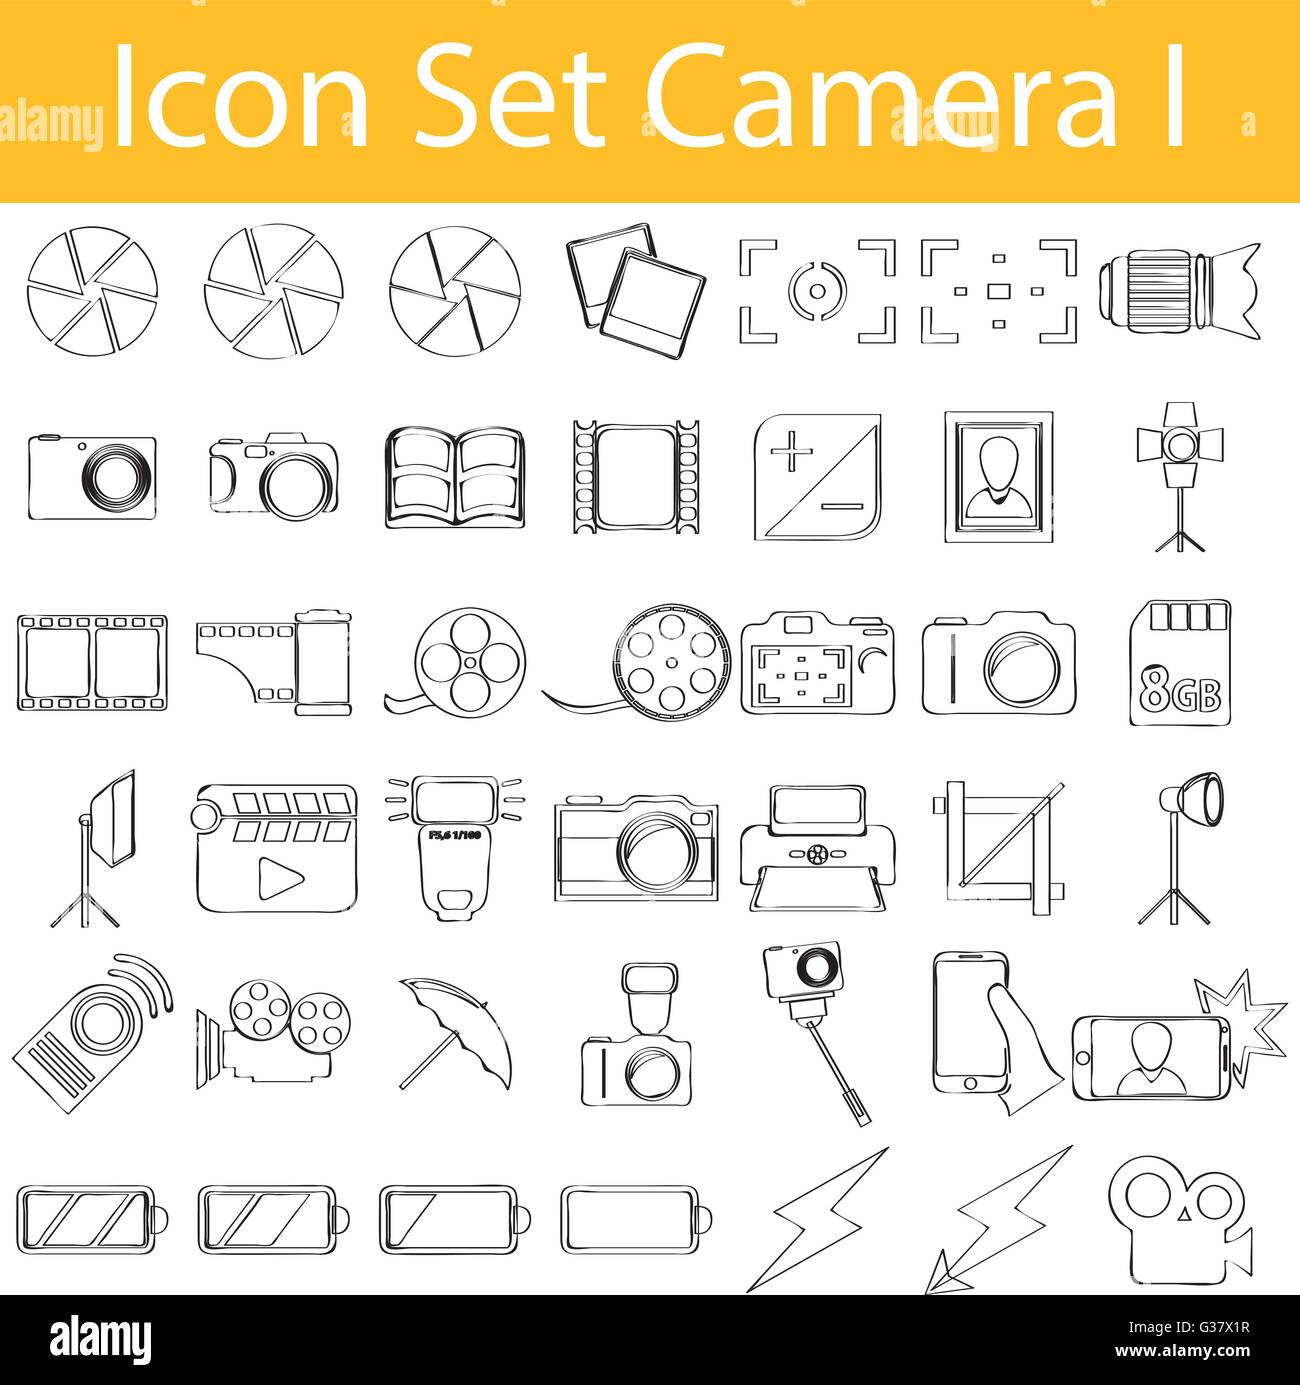 Drawn Doodle Lined Icon Set Camera I with 42 icons for the creative use in graphic design Stock Vector